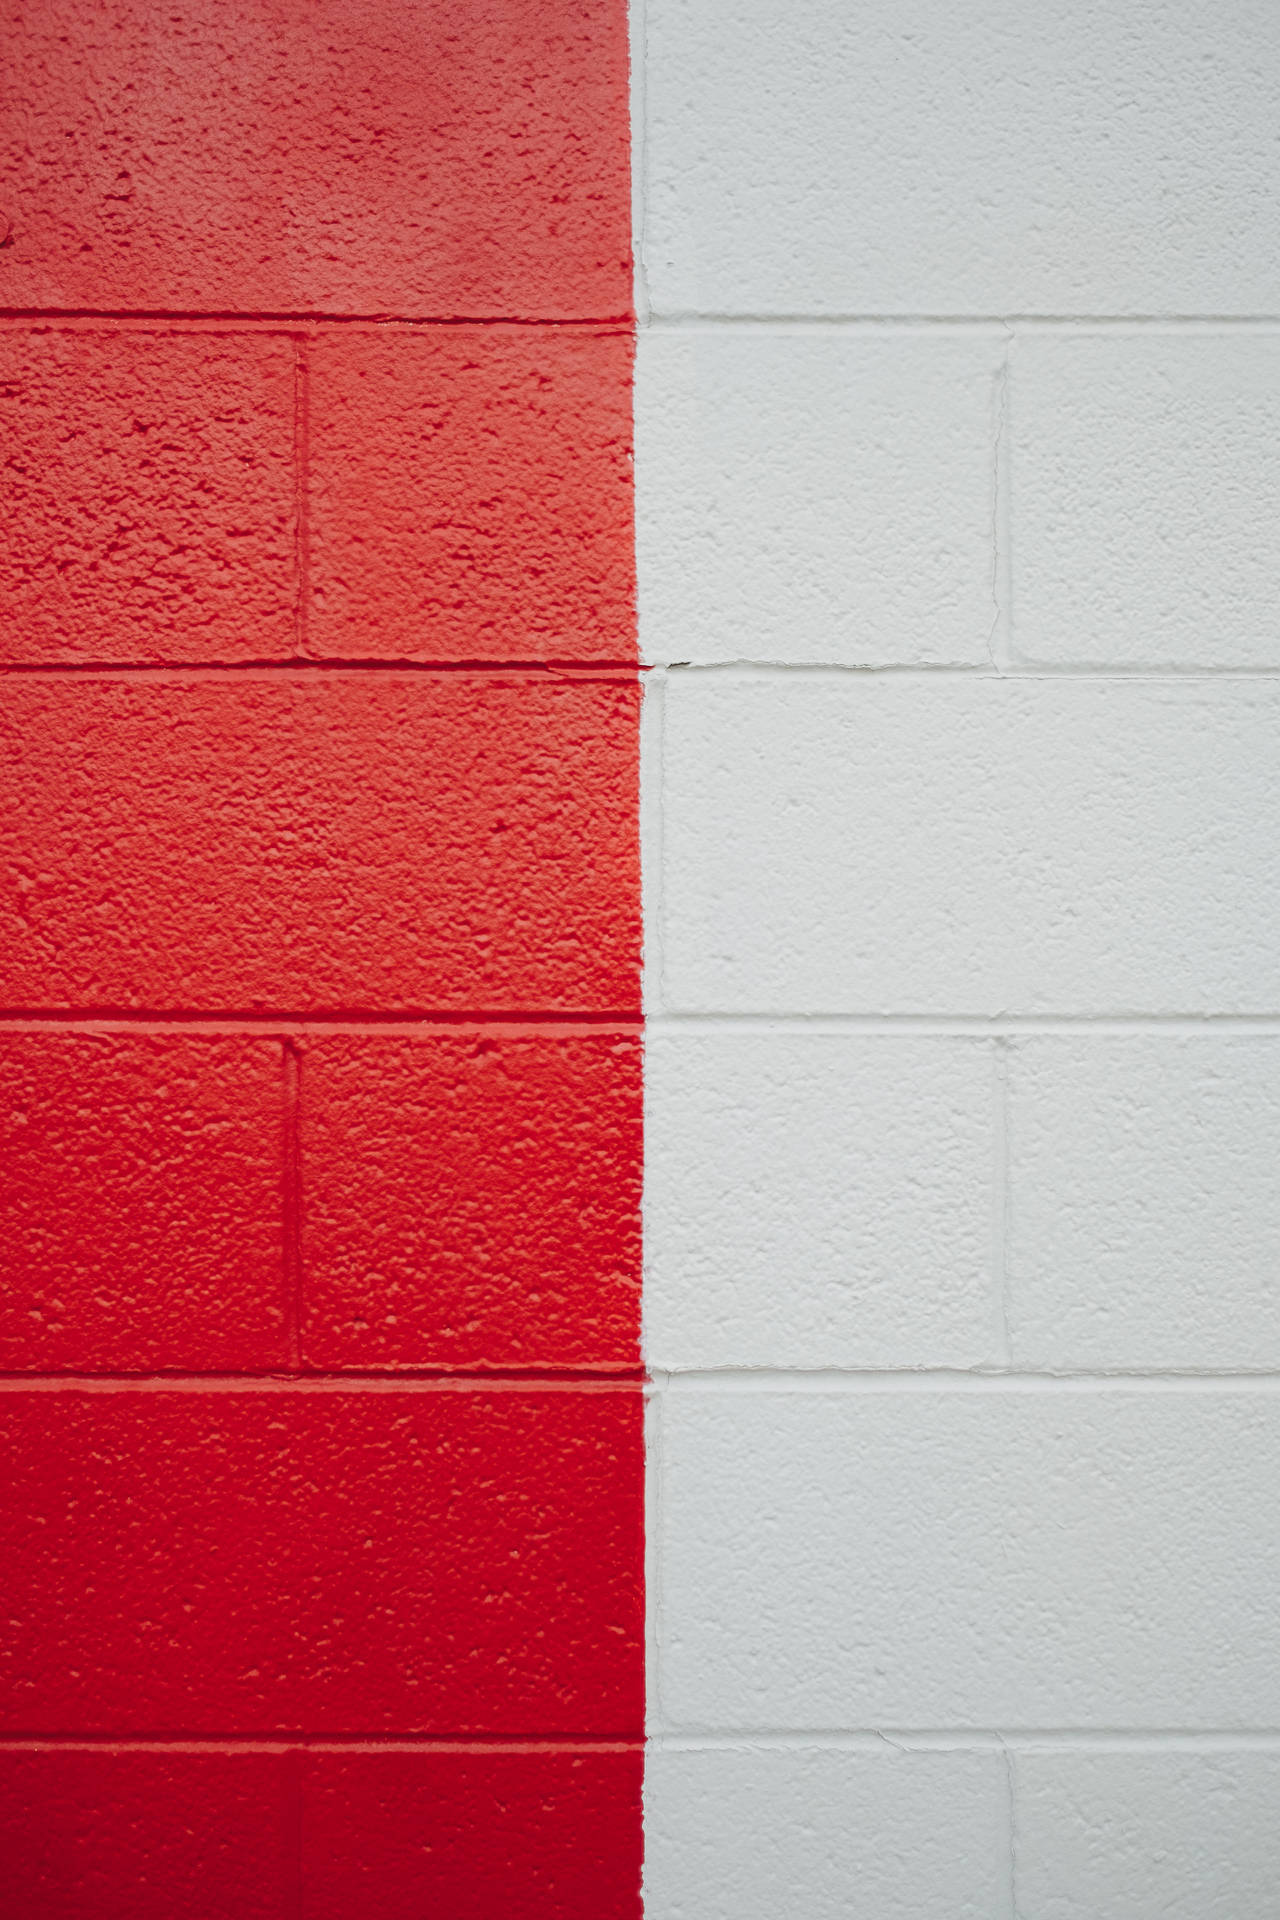 Red And White Wall